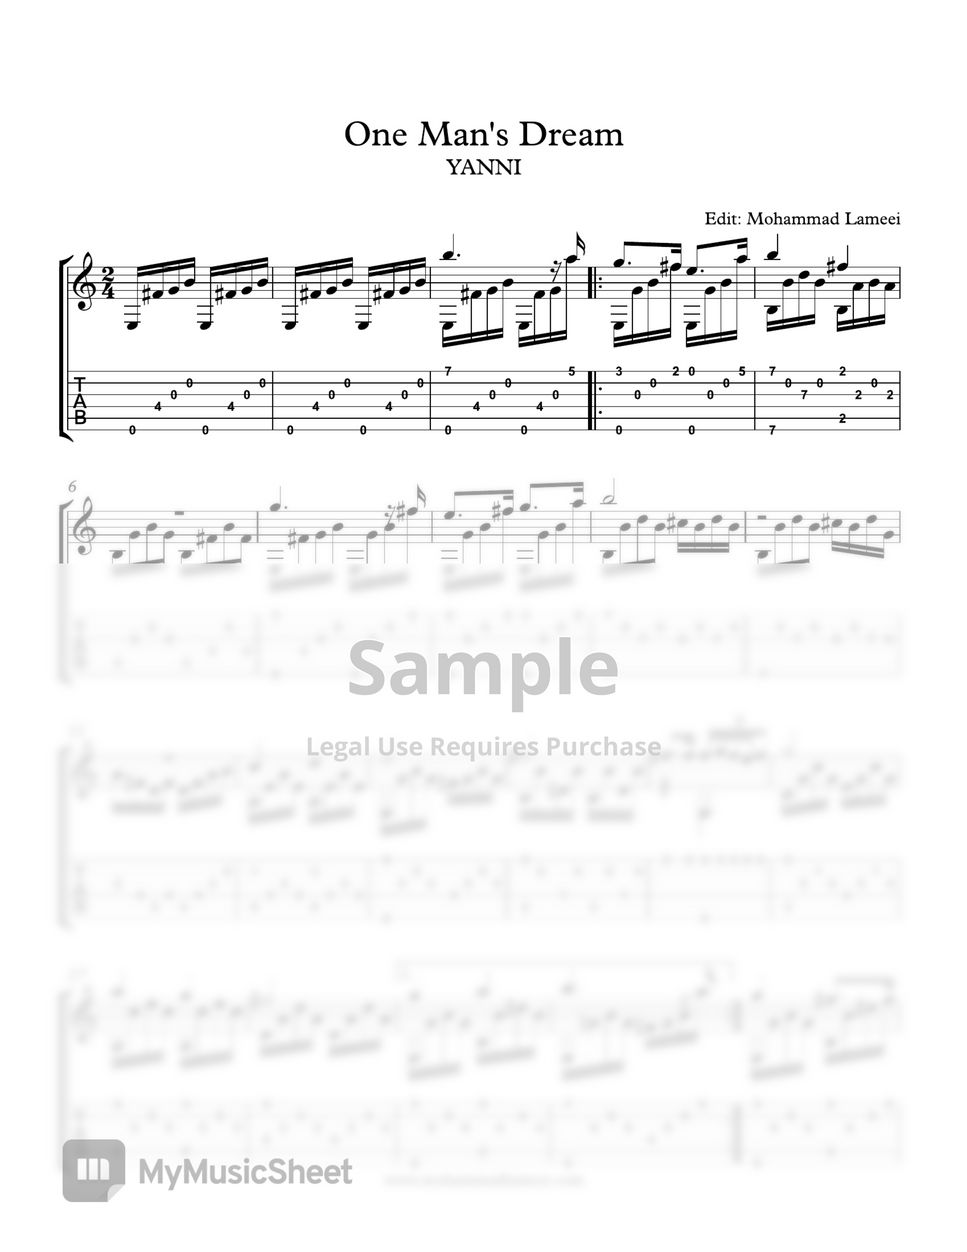 Yanni - One man's Dream by Mohammad Lameei